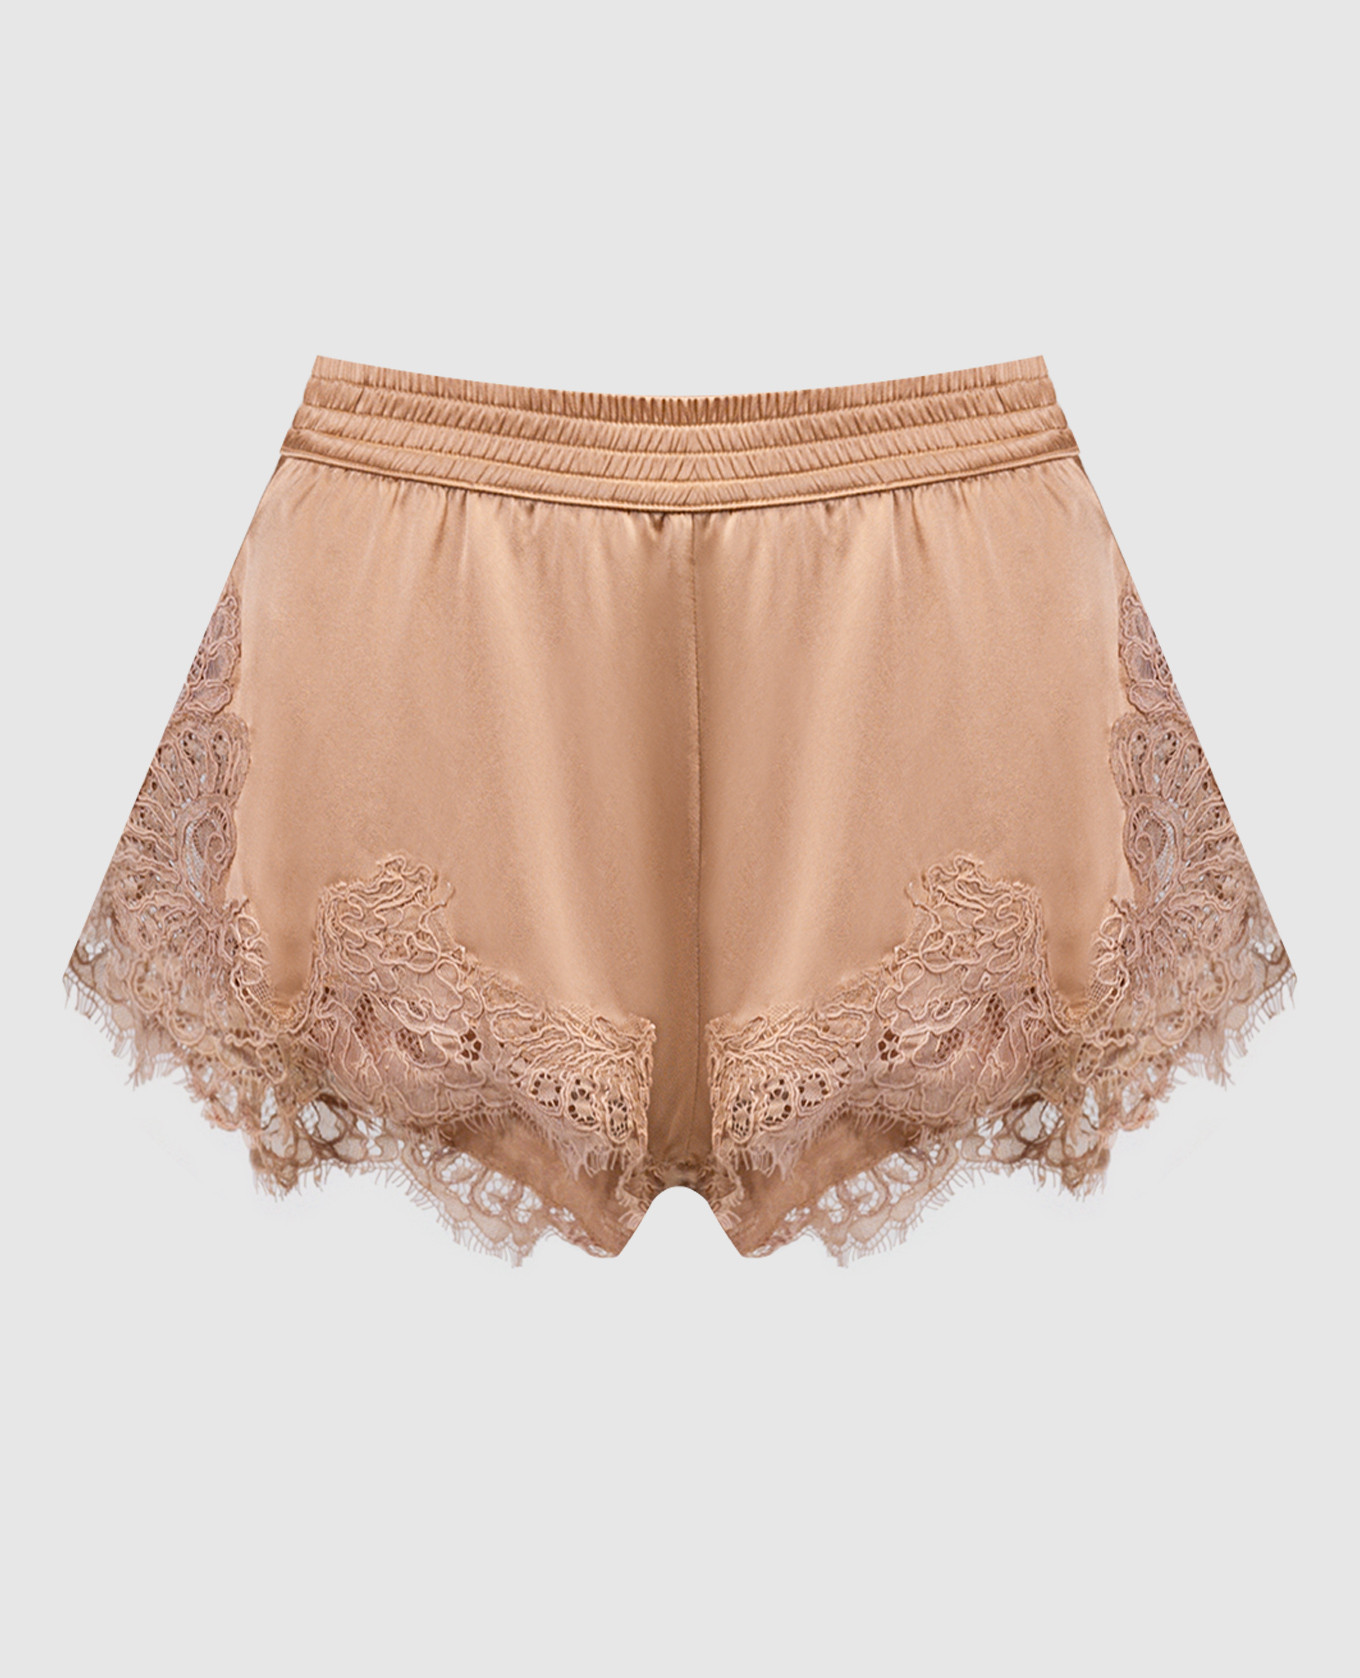 Brown panties-shorts made of silk with lace